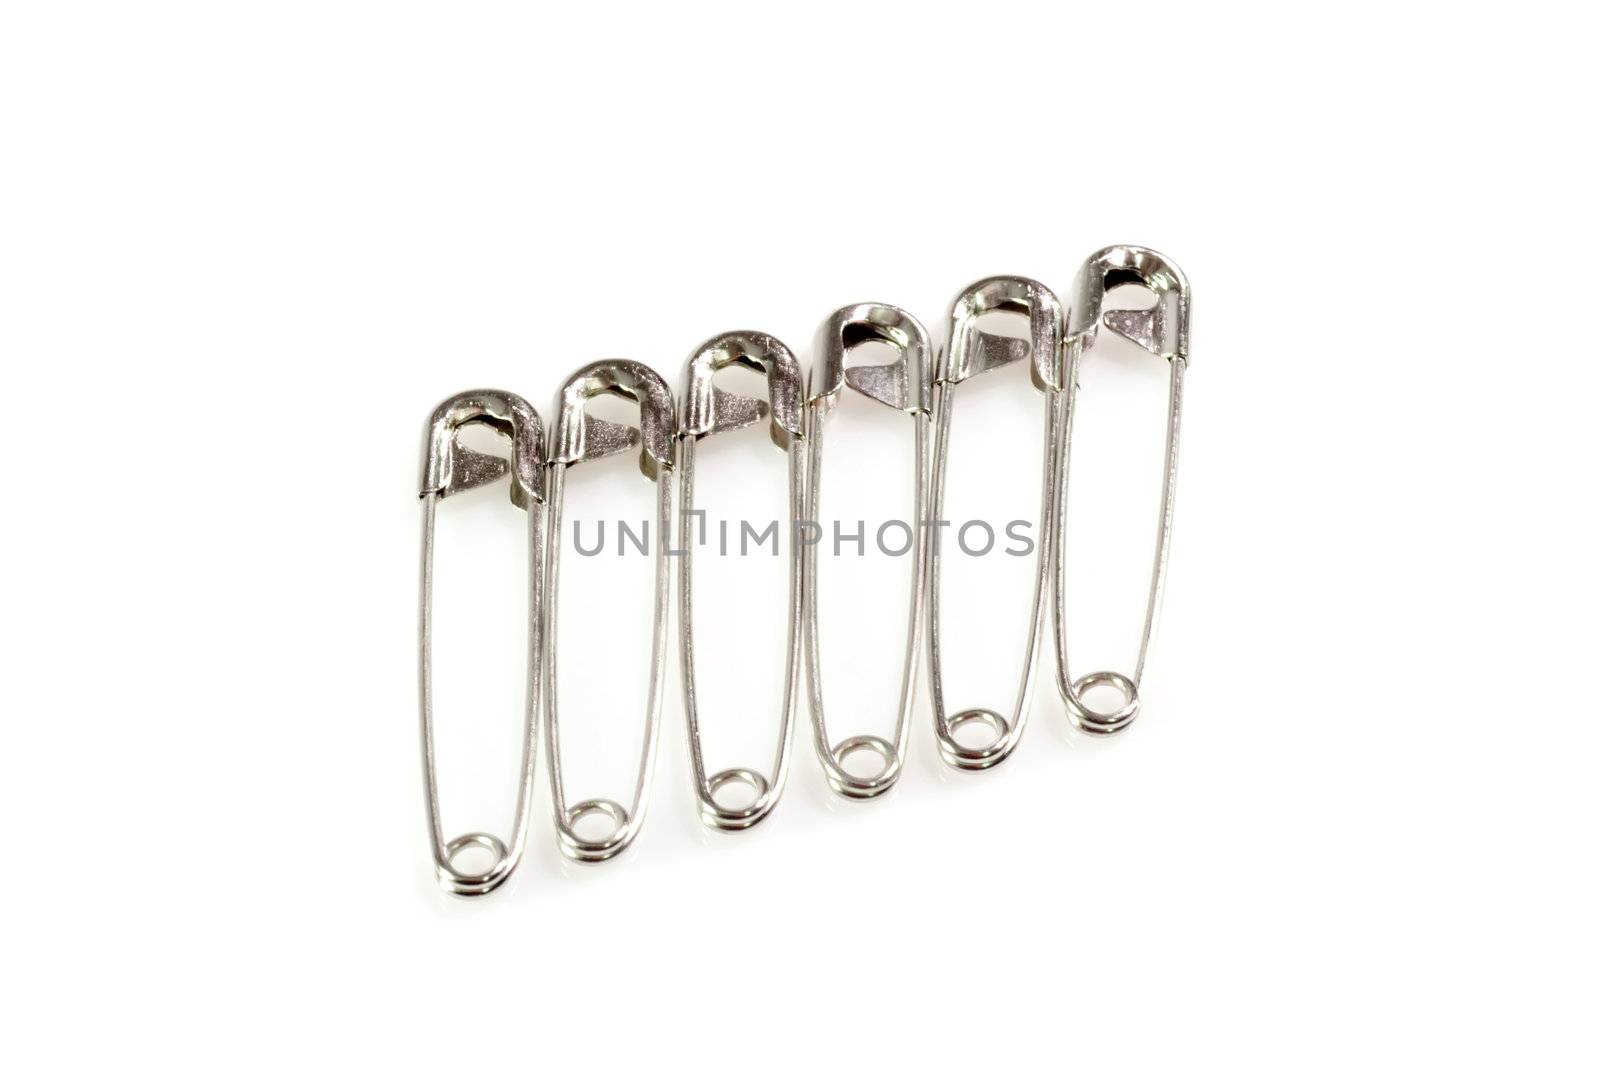 Six silver safety pins on white background